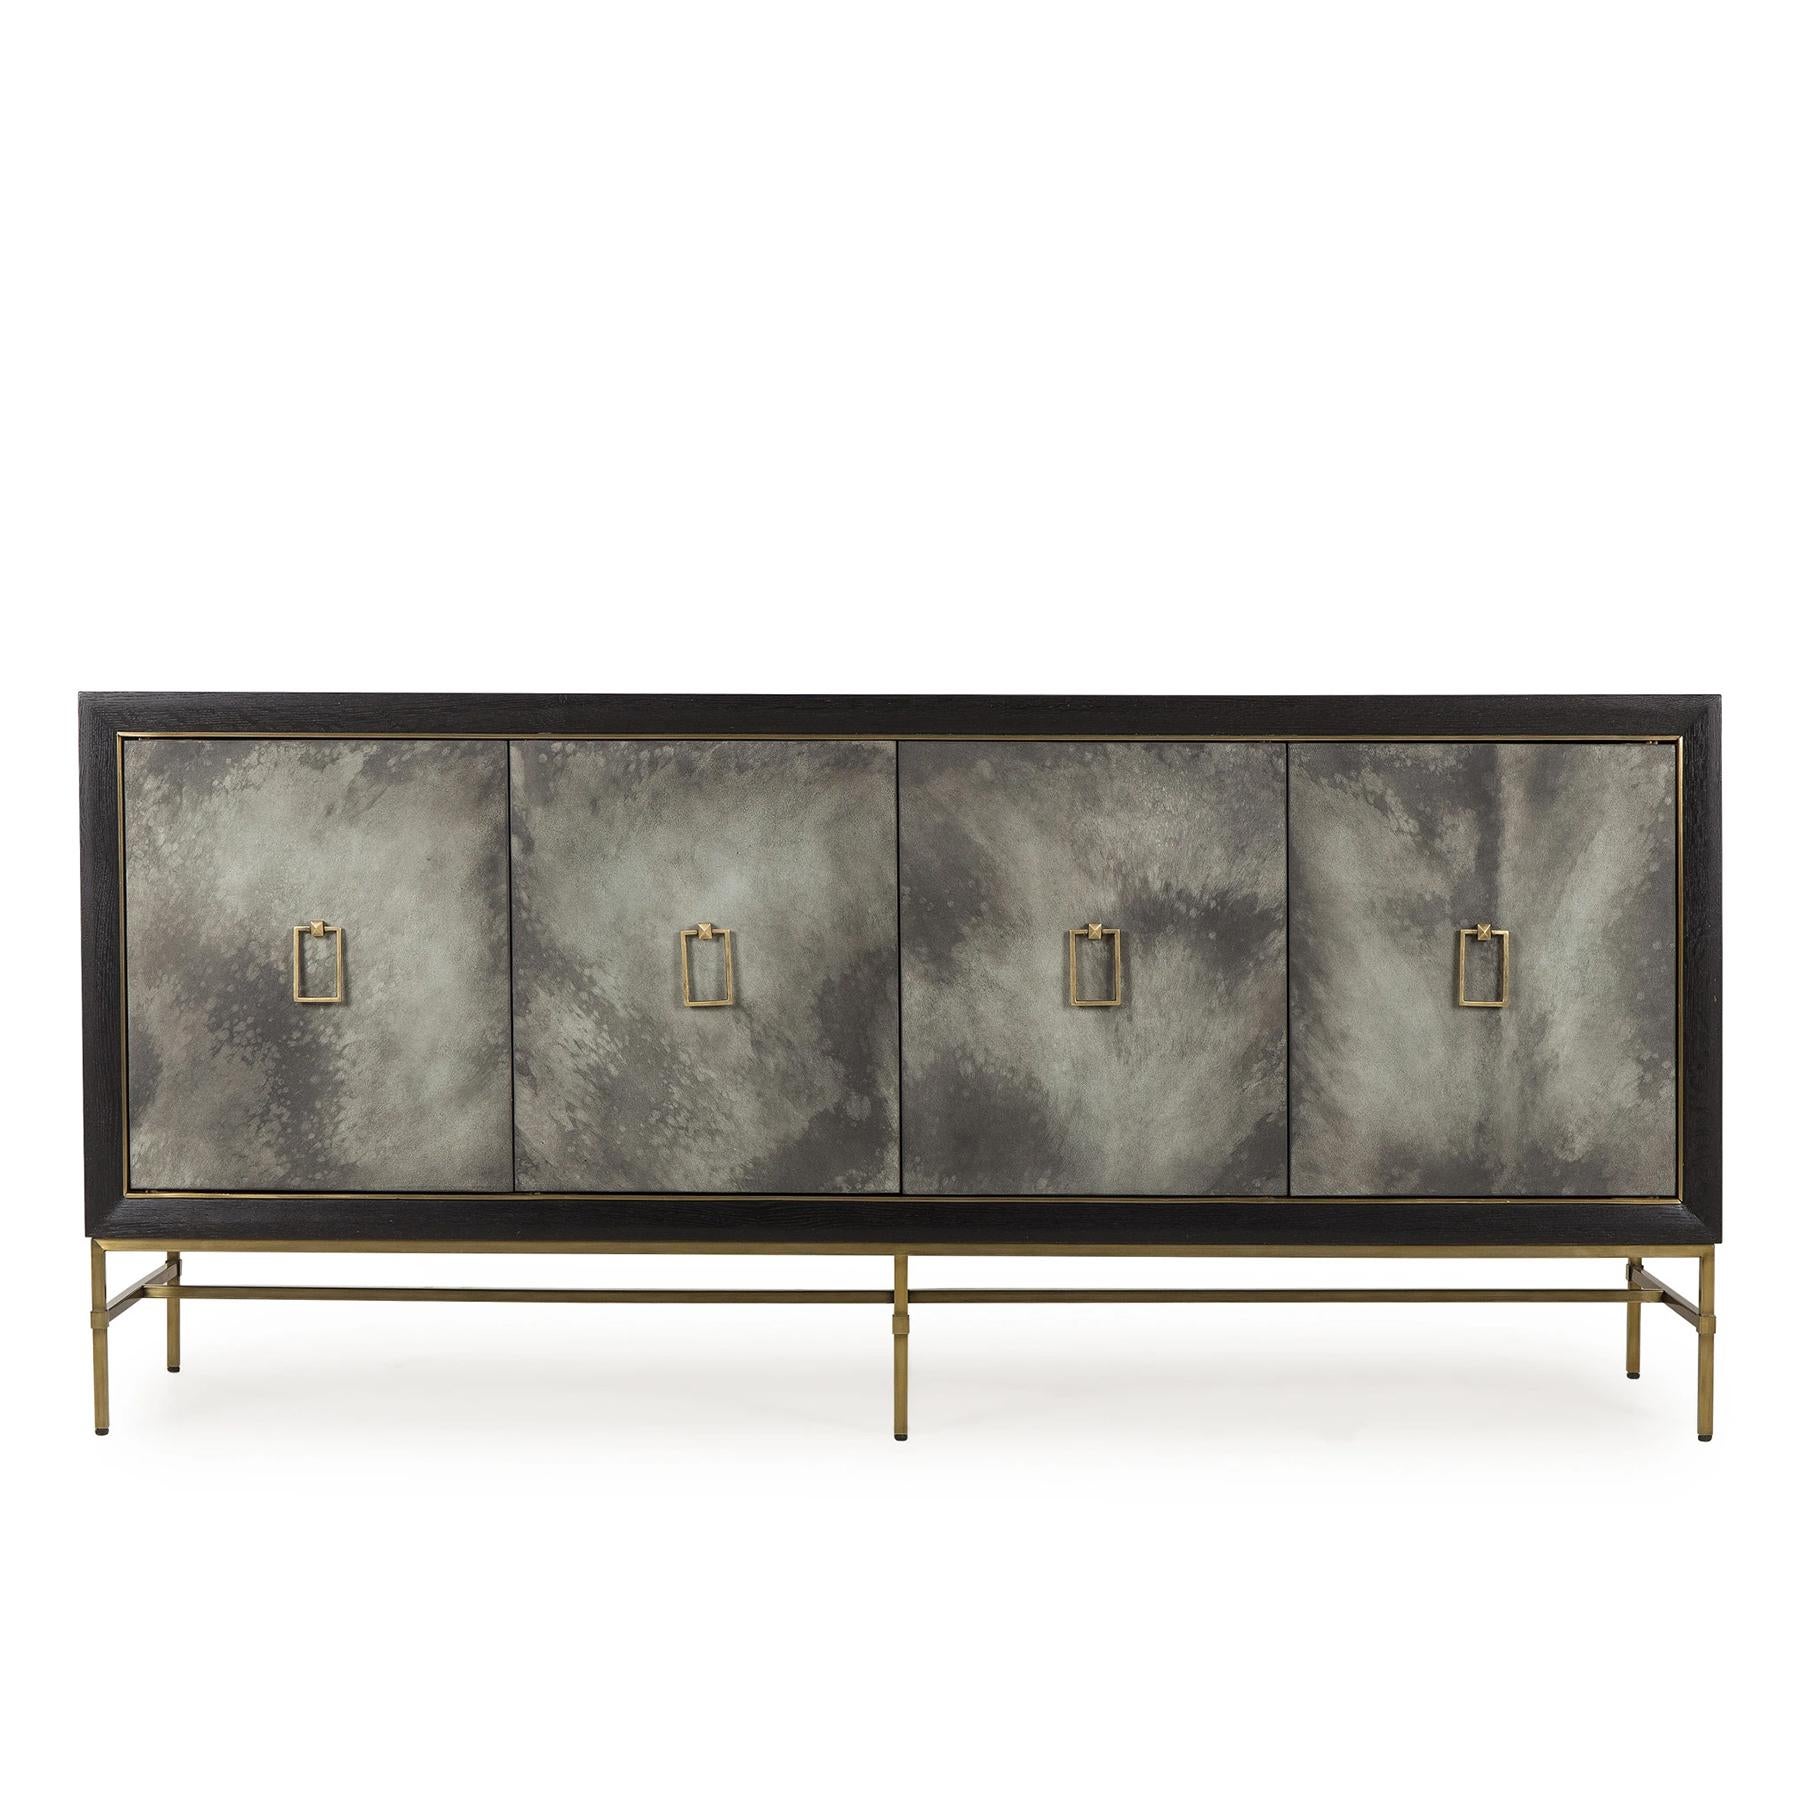 Sideboard shades with structure in solid oak in ebonized
finish, with charcoal finishes on the 4 doors. With antique
brass handles and base frame. Sideboard with 3 shelves
and 1 drawer.